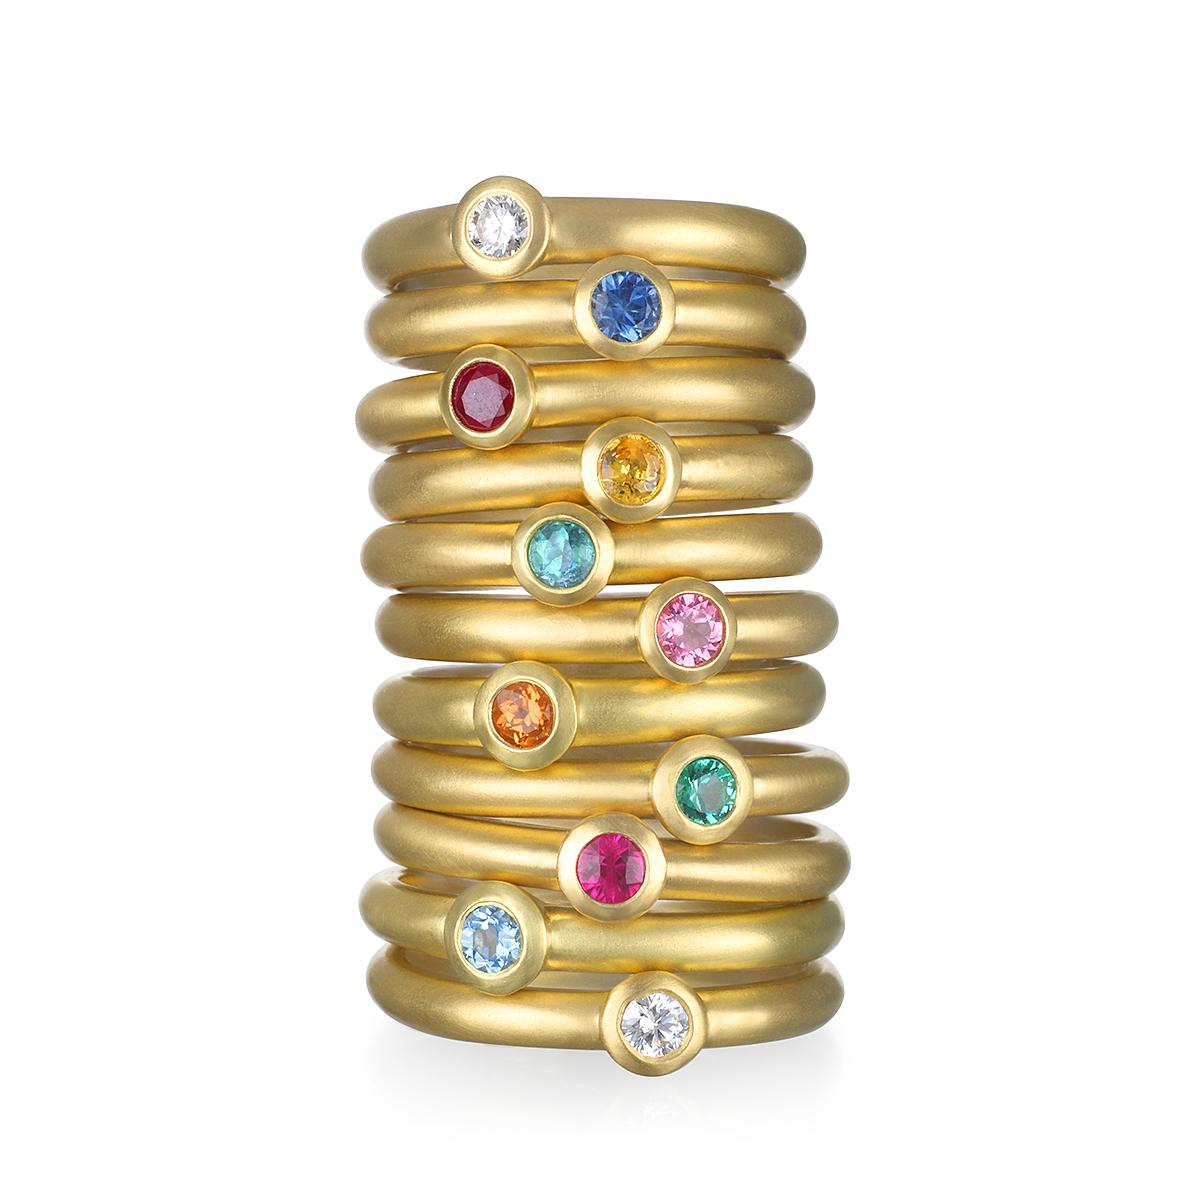 The perfect bright Blue Green African Tourmaline stack ring. Beautifully crafted, bezel set and matte-finished.  Wear alone or stacked with other rings to elevate your individual style!

Handcrafted in 18k green gold, Faye Kim’s modern design